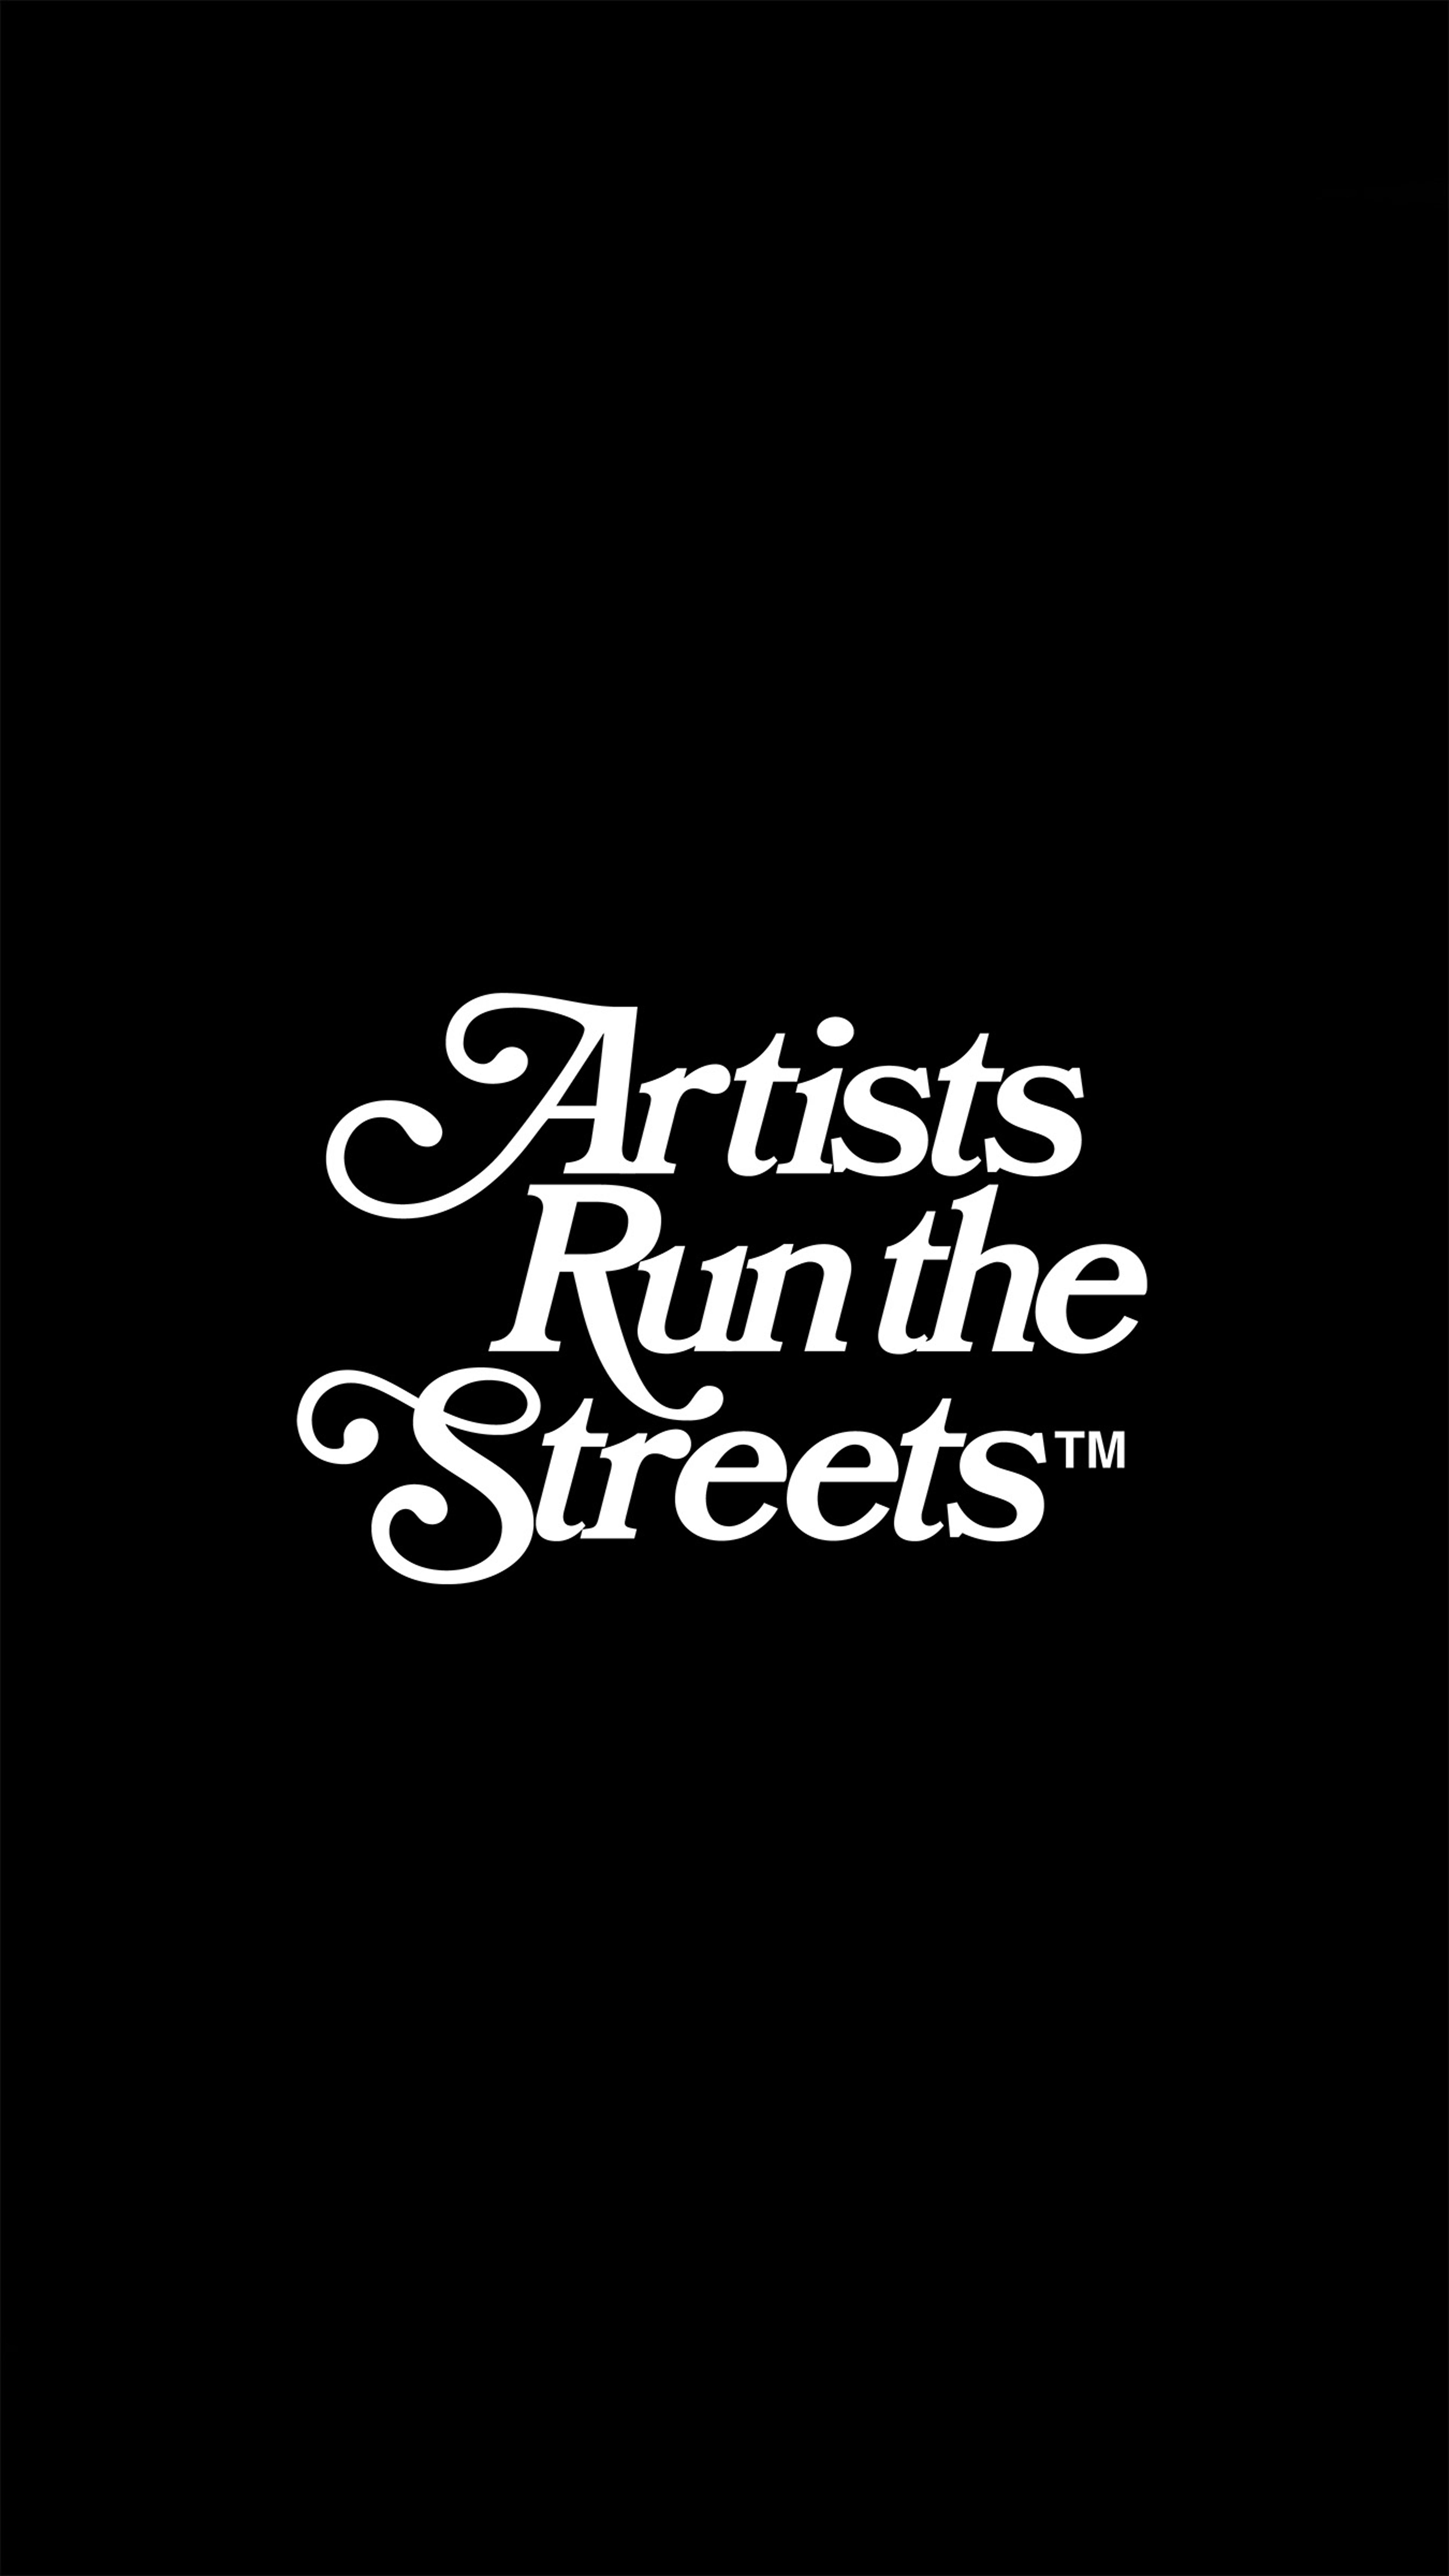 Preview image for the show titled "Artists Run The Streets™ Collection" at Today @ 8:00 PM